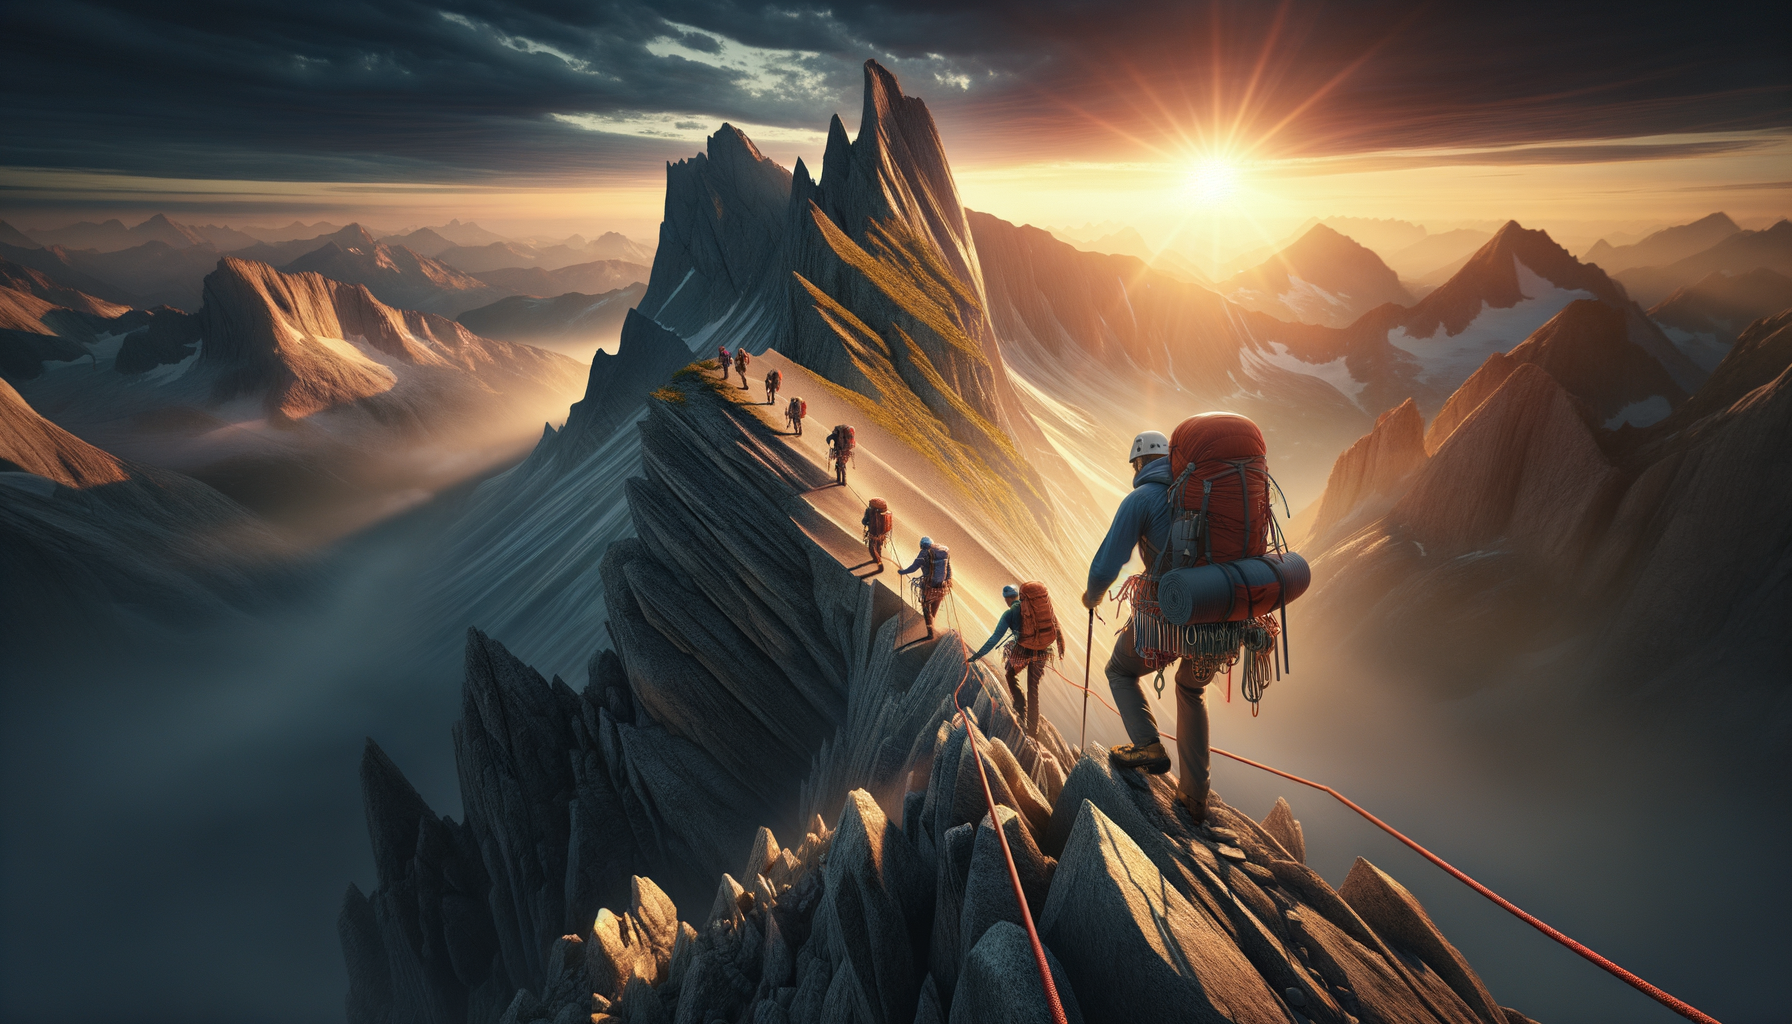 a modern climbing expedition expertly outfitted and rigged, being led along a knifes edge towards a pinnacle summit by a Maine mountain man at dawns light